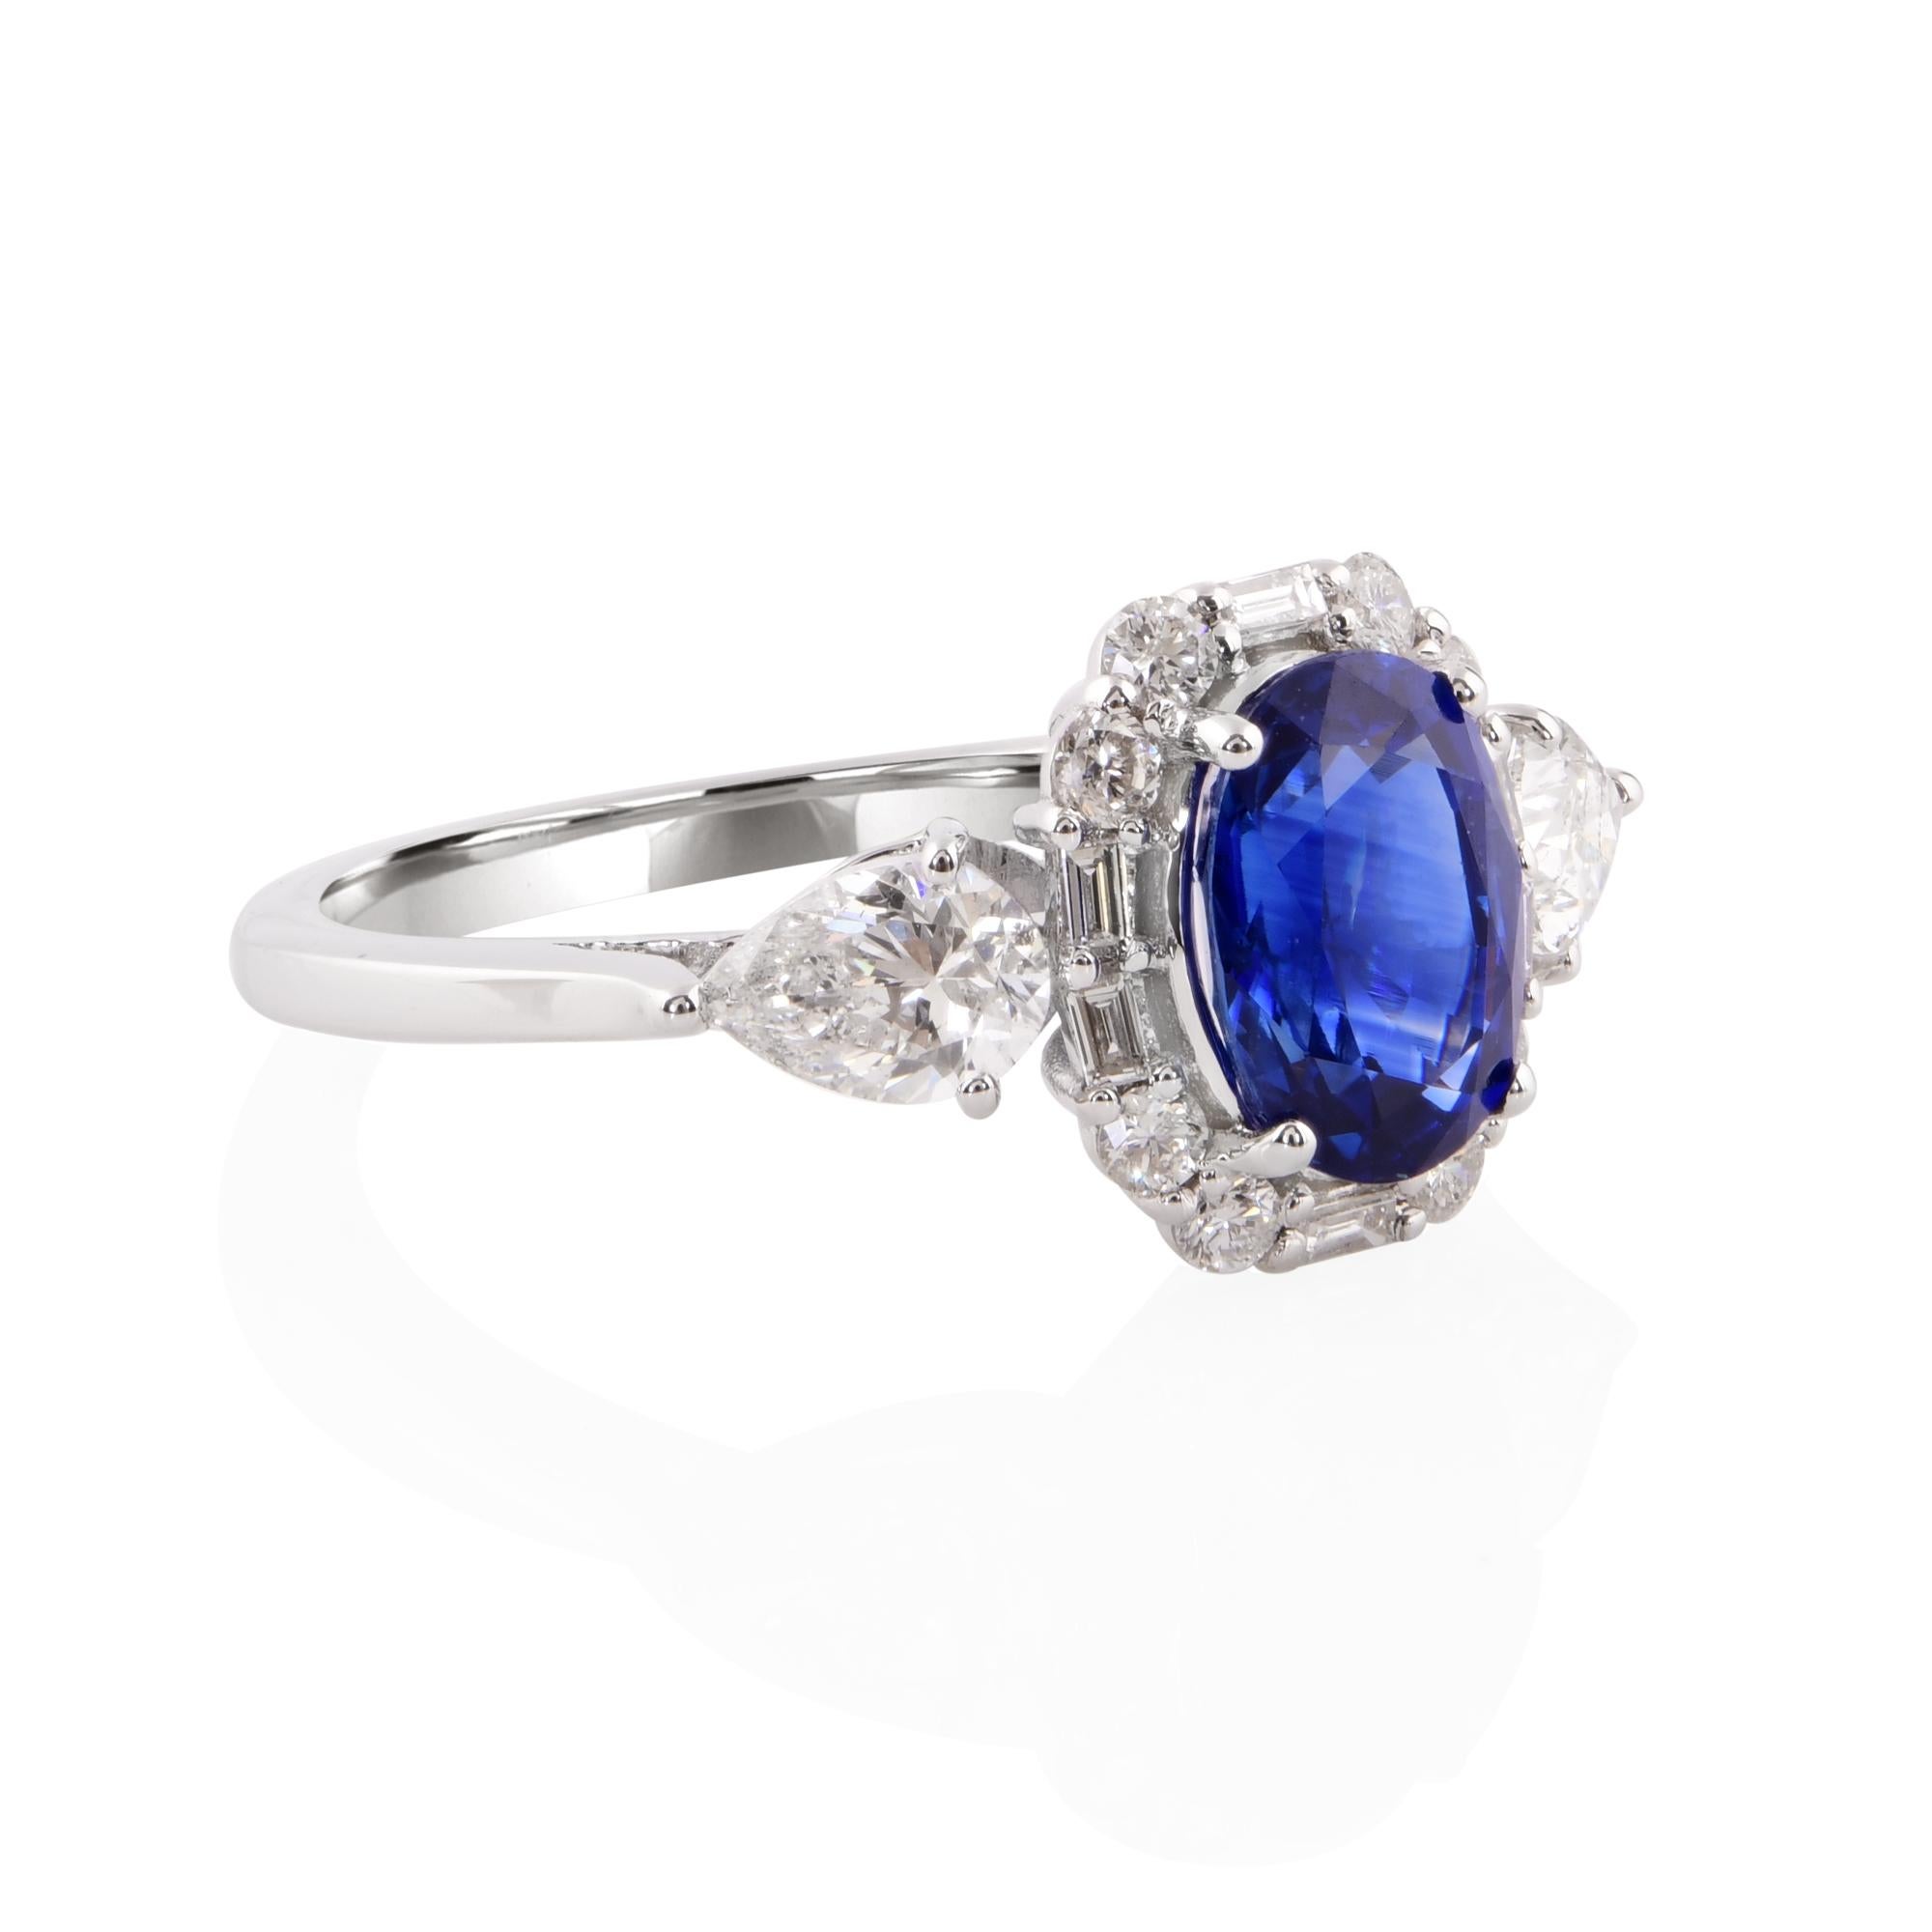 This statement piece transcends trends, making it a timeless addition to any jewelry collection. Whether worn as a symbol of elegance for formal occasions or as a stunning accent for everyday glamour, this Blue Sapphire Cocktail Ring is sure to